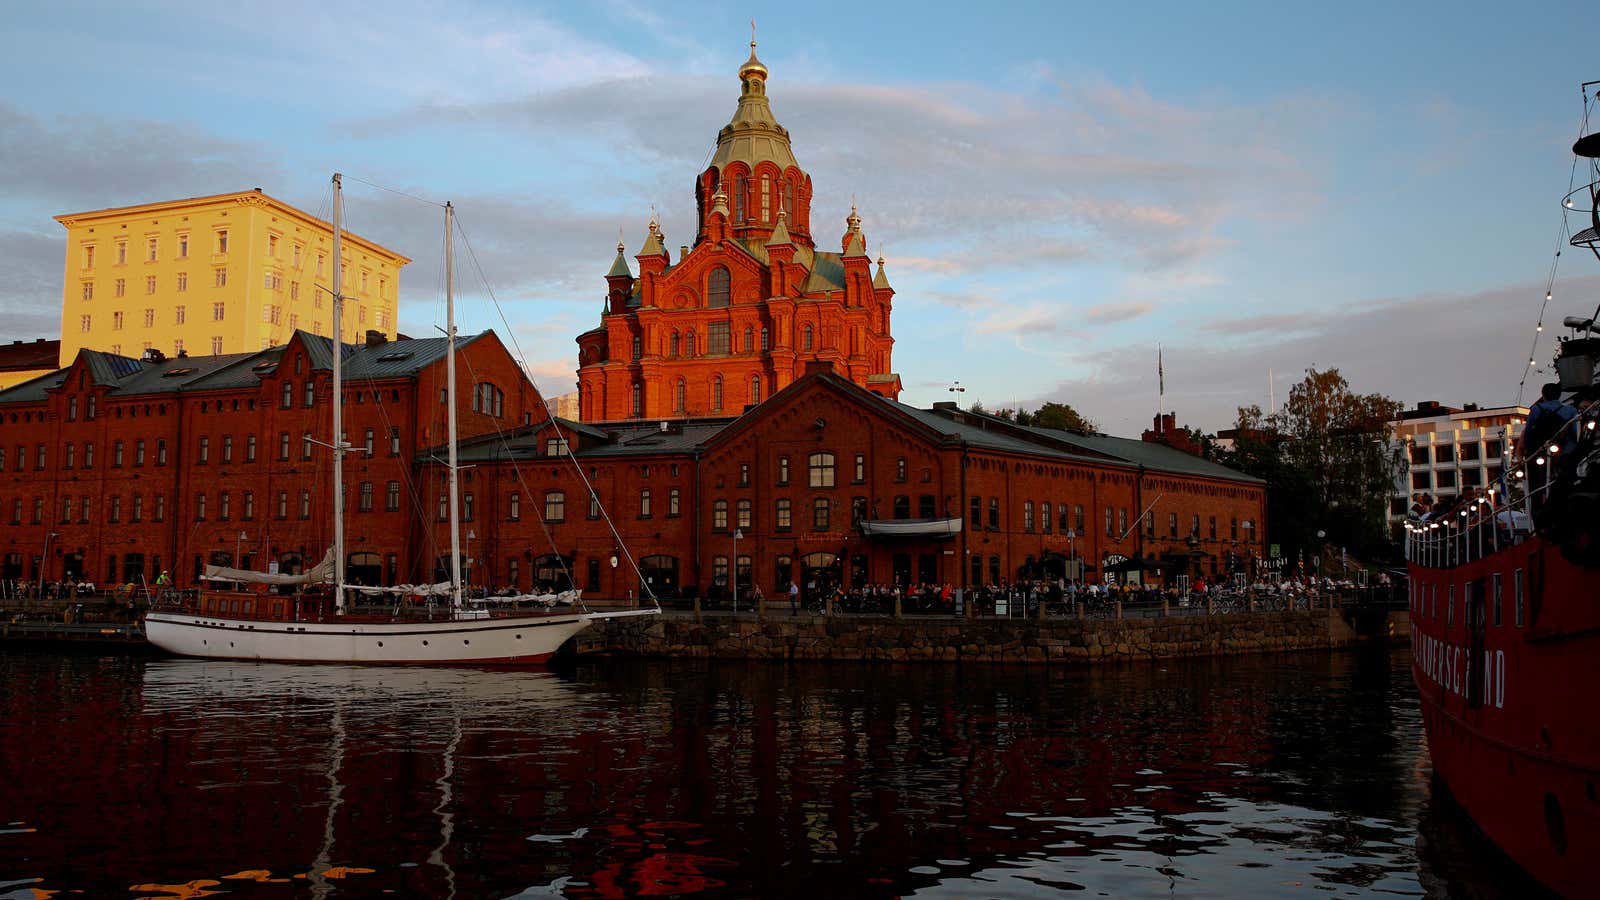 Helsinki built a data center into the bowels of the 19th century Uspenski Cathedral, and used its heat to warm 1,000 downtown apartments.